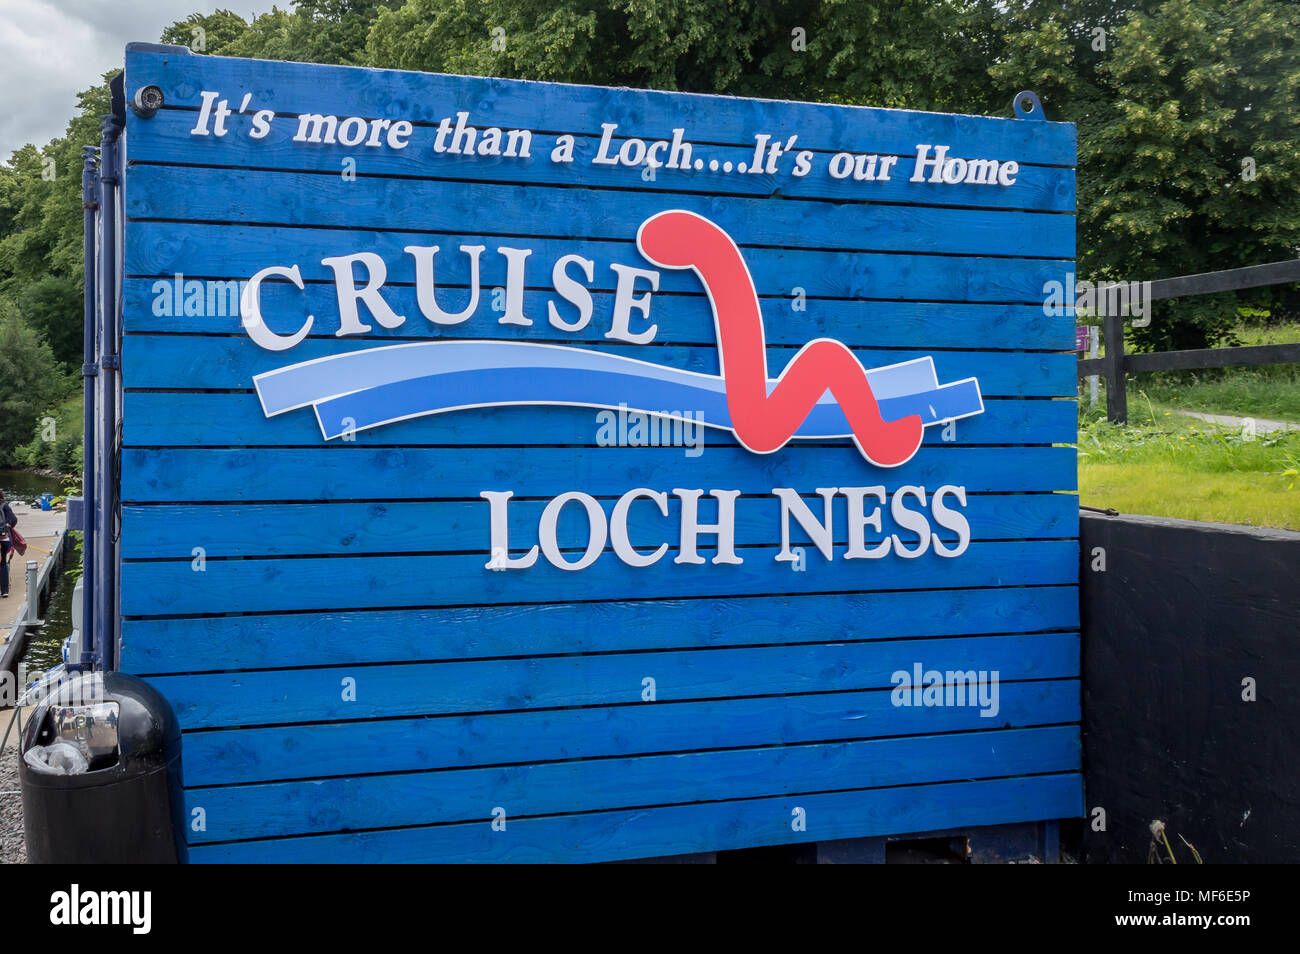 Loch Ness, Inverness, Scotland, UK - July 31, 2016: A board reading Cruise Loch Ness on the way to the famous Loch Ness, Scotland, United Kingdom Stock Photo